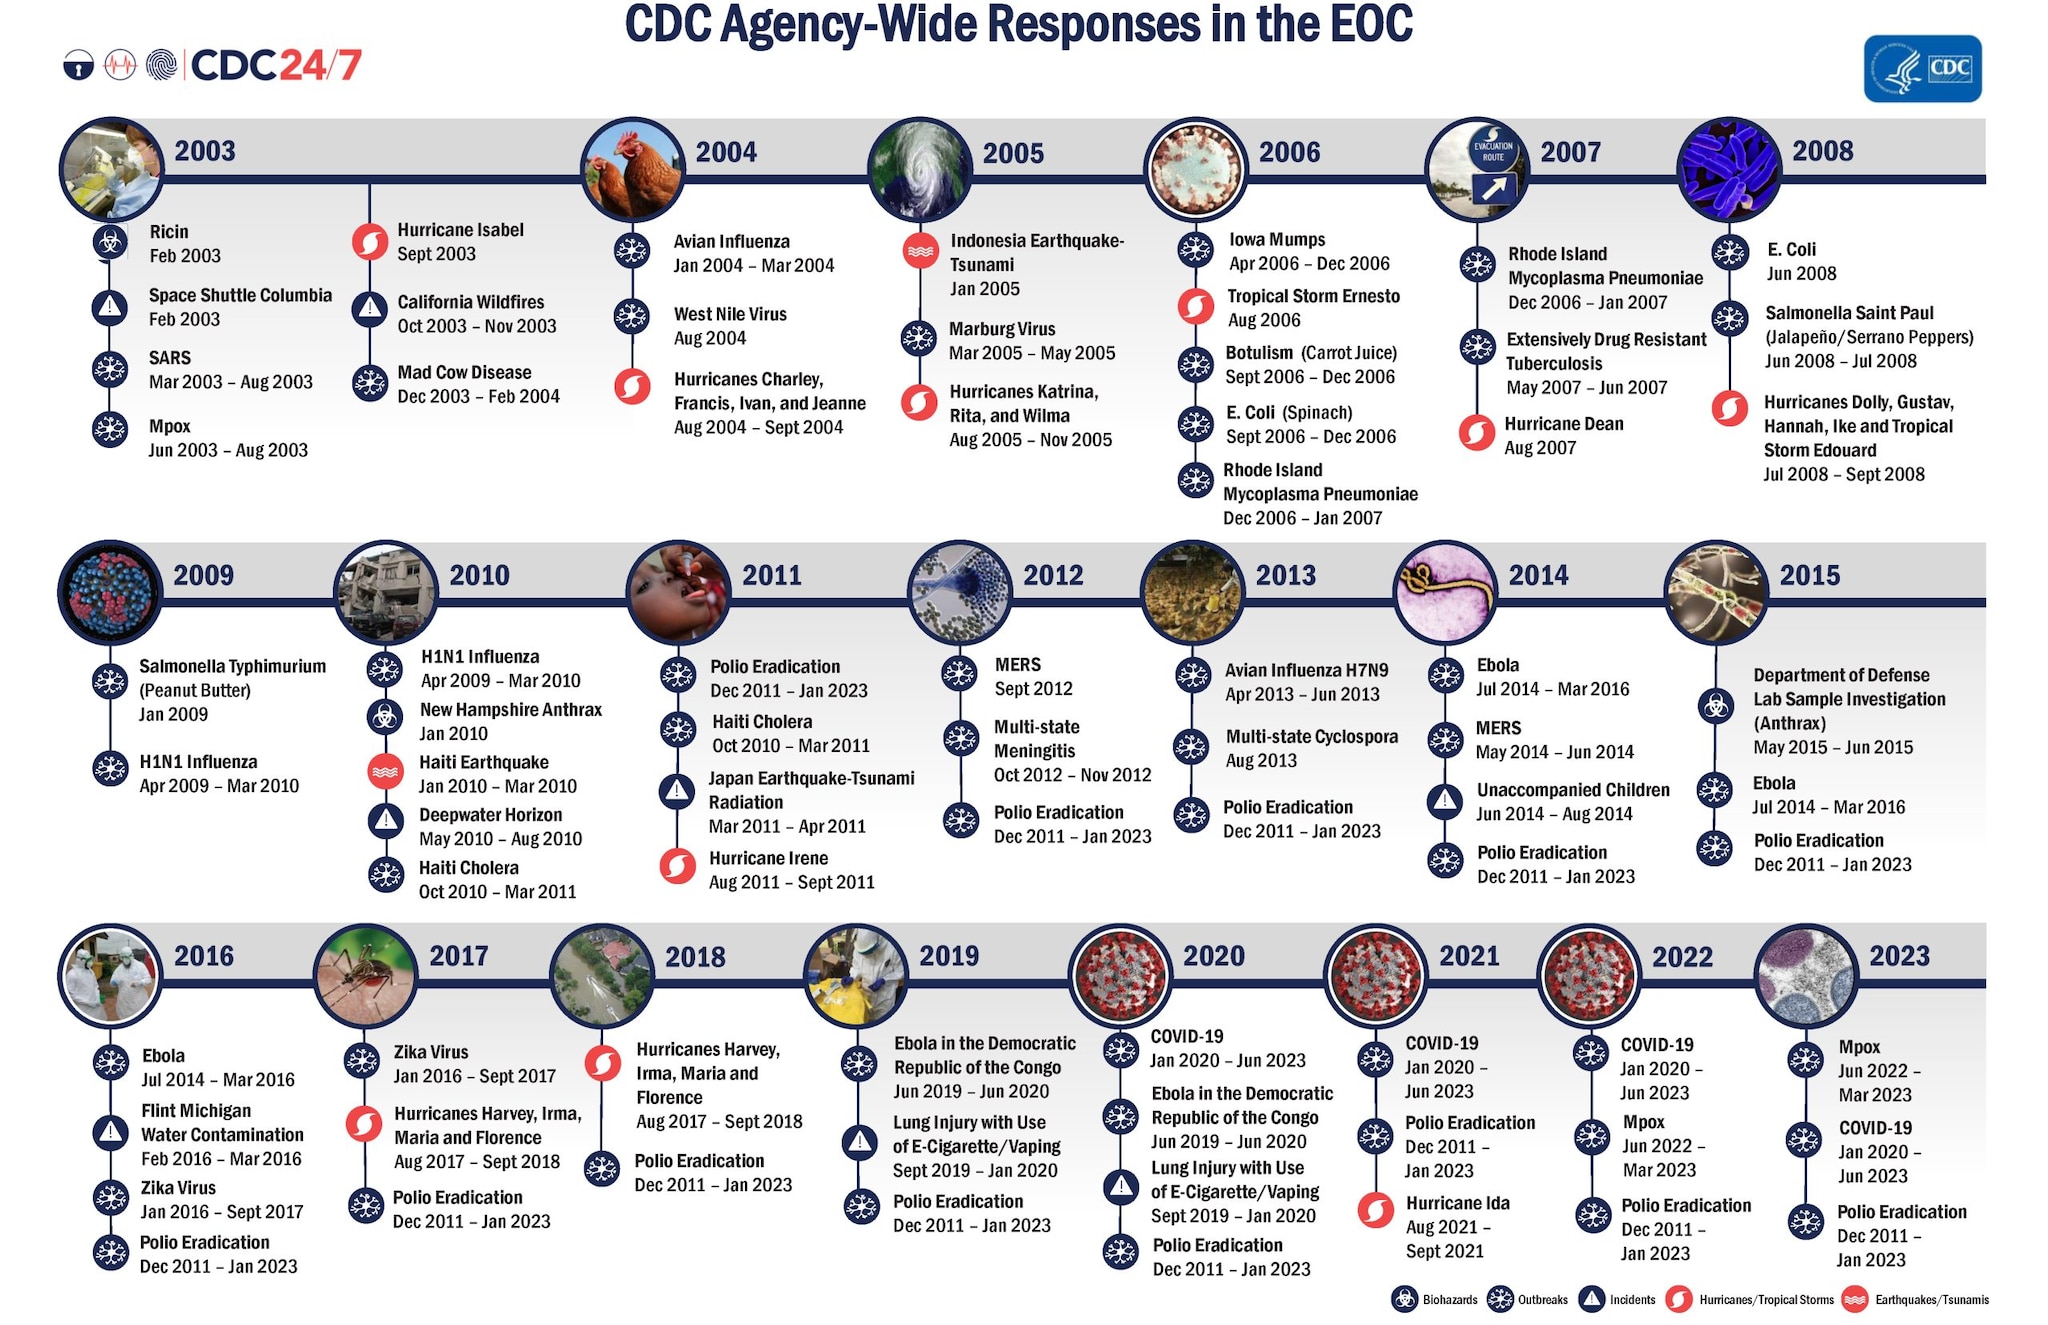 CDC Agency-Wide Responses in the EOC